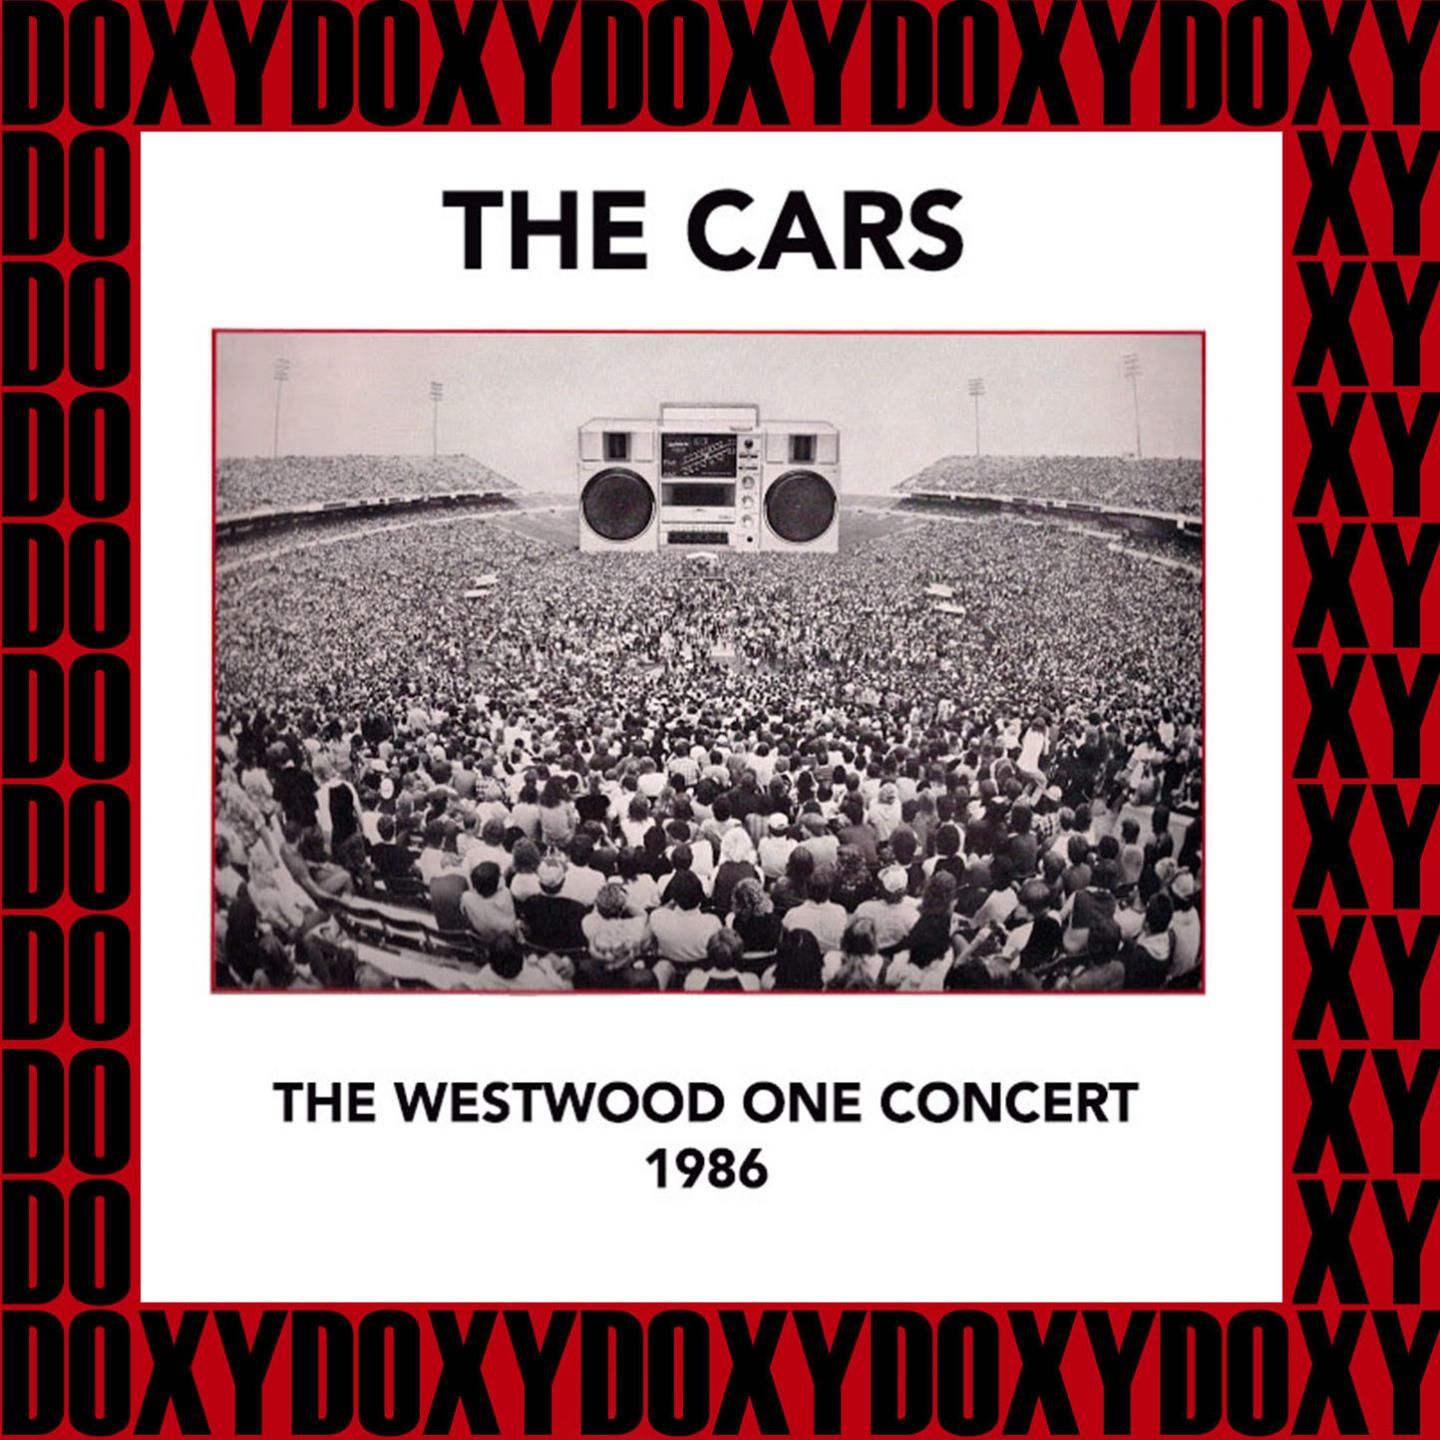 The Westwood One Concert, 1986 (Doxy Collection, Remastered, Live on Fm Broadcasting)